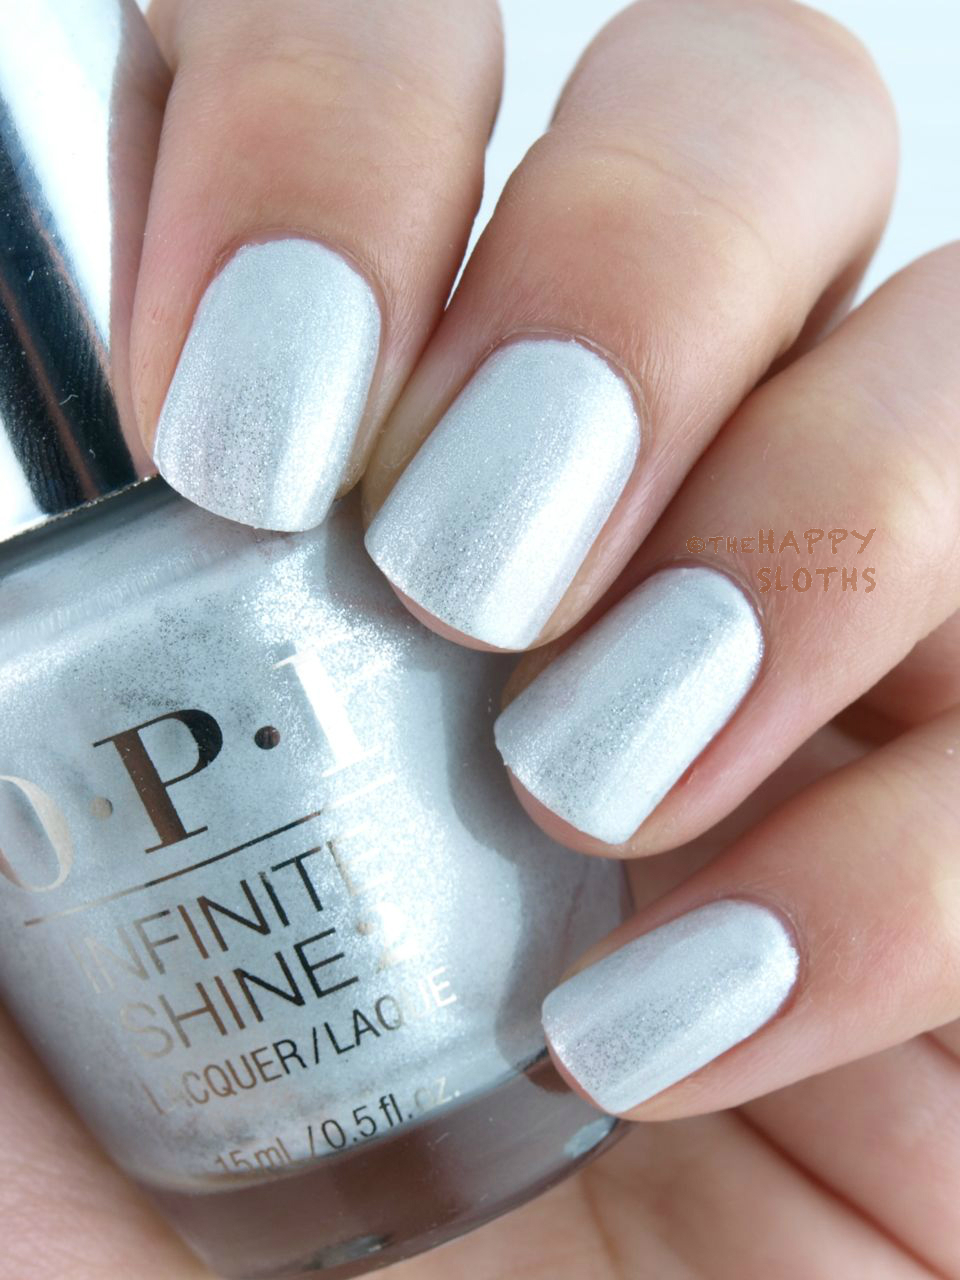 Gelato on my Mind by OPI with Fish Scale Nail Art - The Nail Chronicle